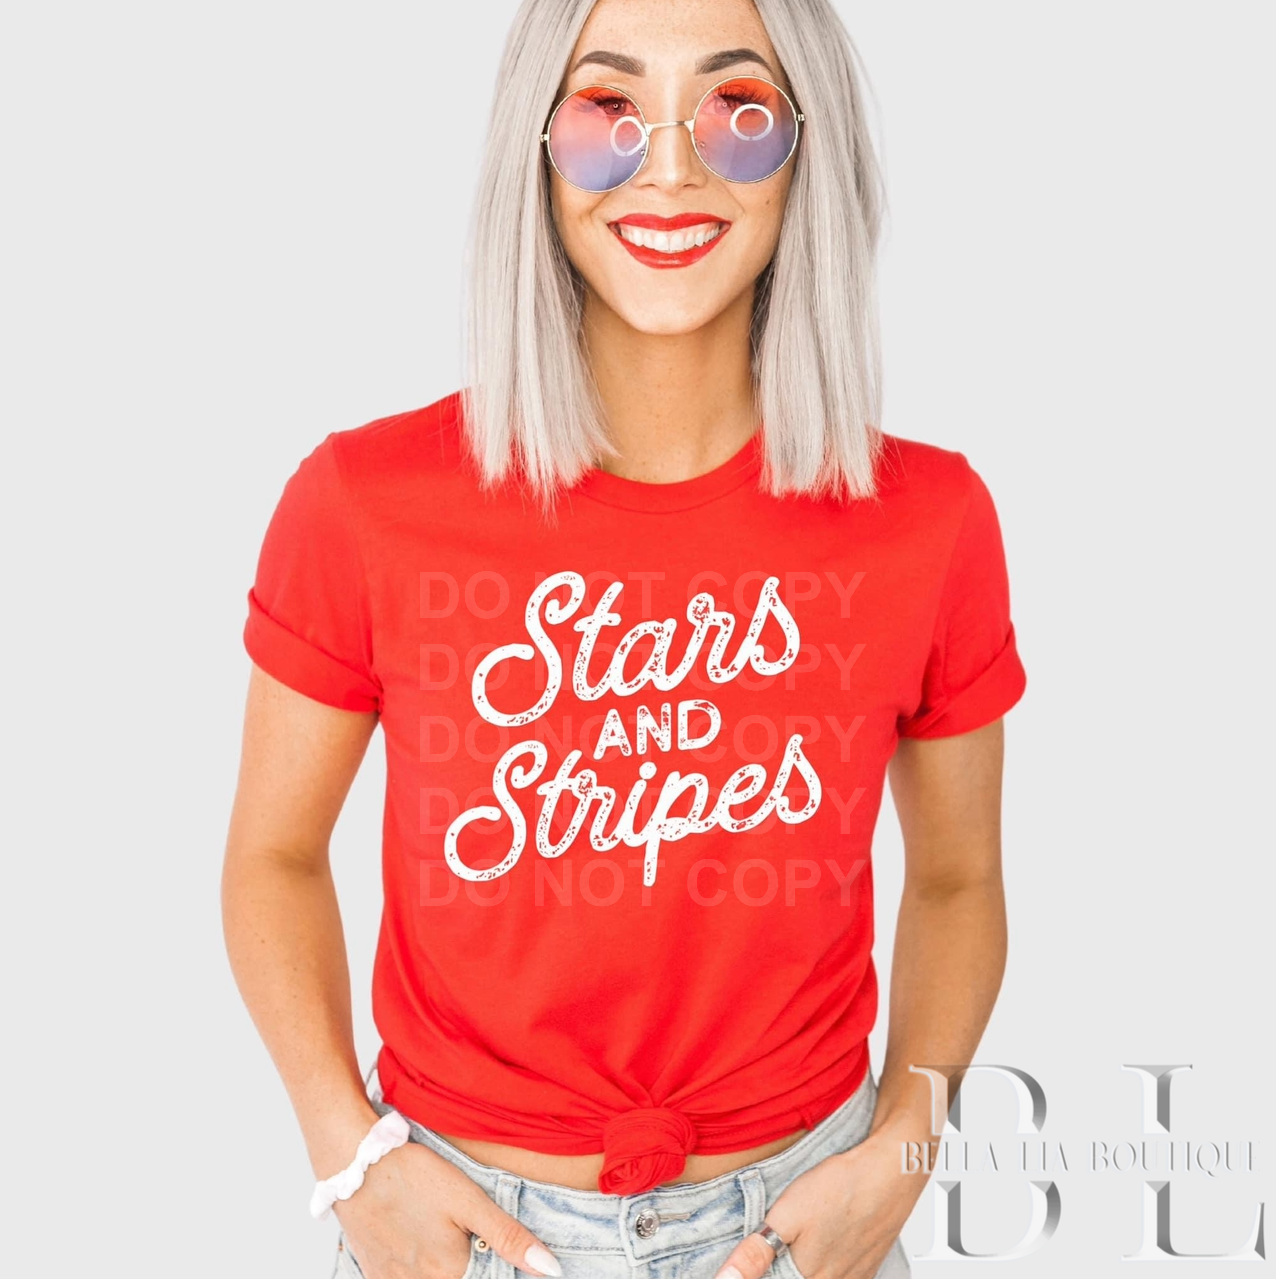 Stars and Stripes Graphic Tee or Sweatshirt - Bella Lia Boutique